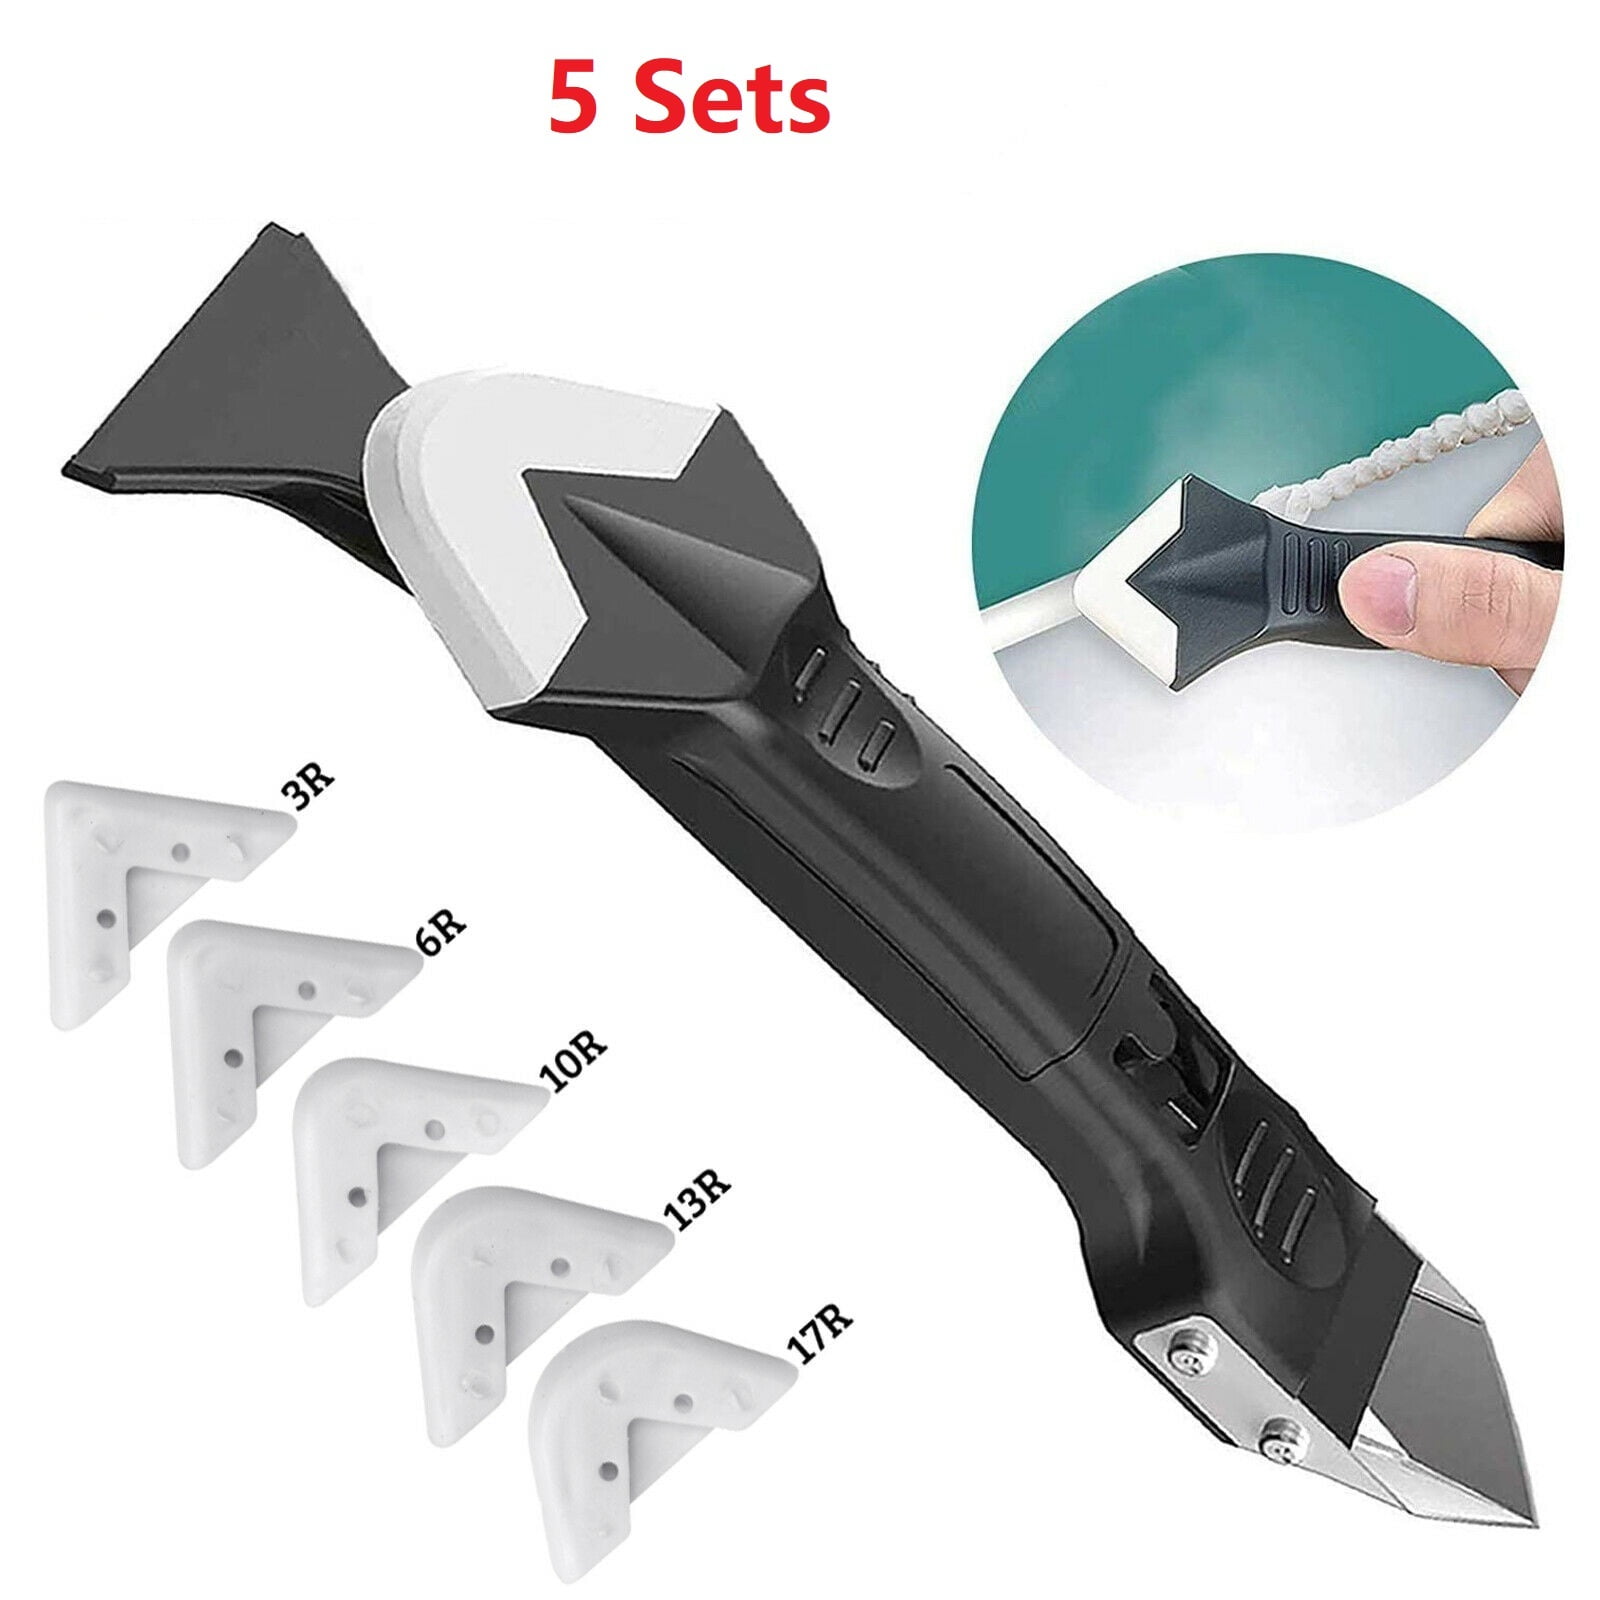 3 in 1 Silicone Sealant Remover Tool Kit, Smooth Scraper Caulking Mould Finisher Removal Set, for Ground Mortar Kitchen and Door Frames, 50